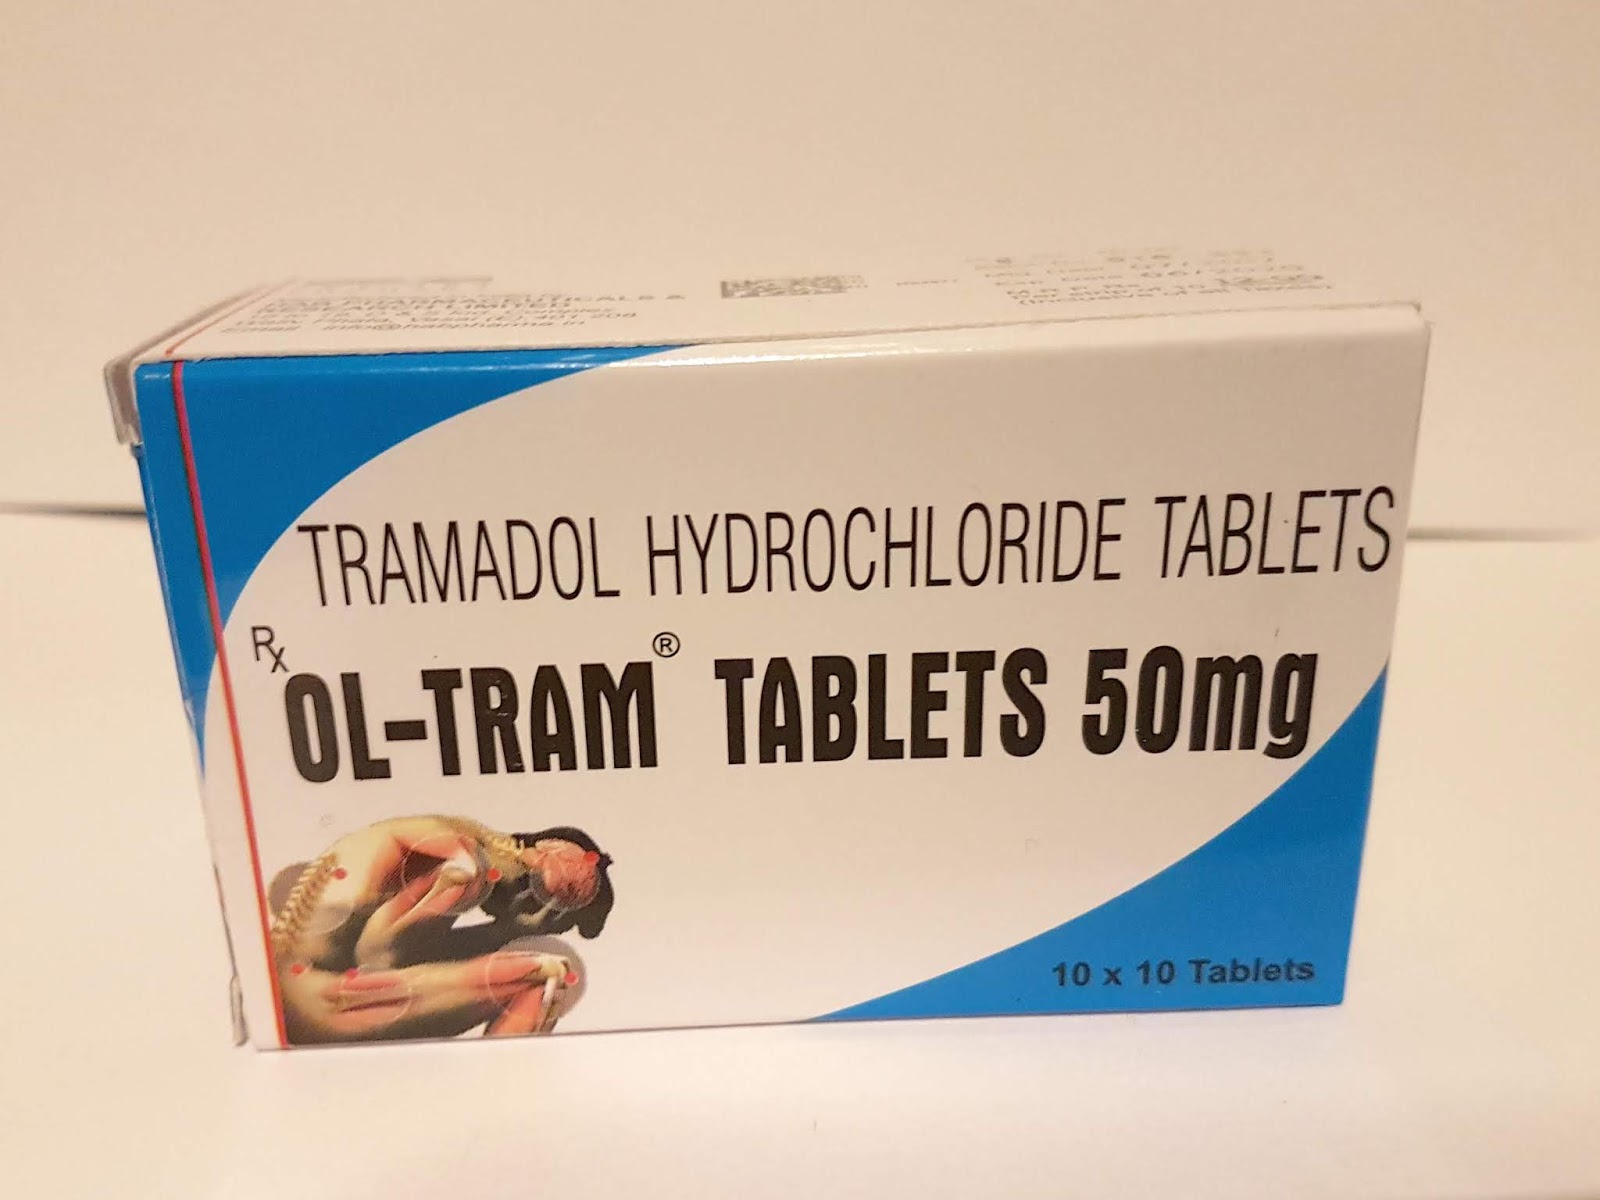 Tramadol ulcers does affect stomach